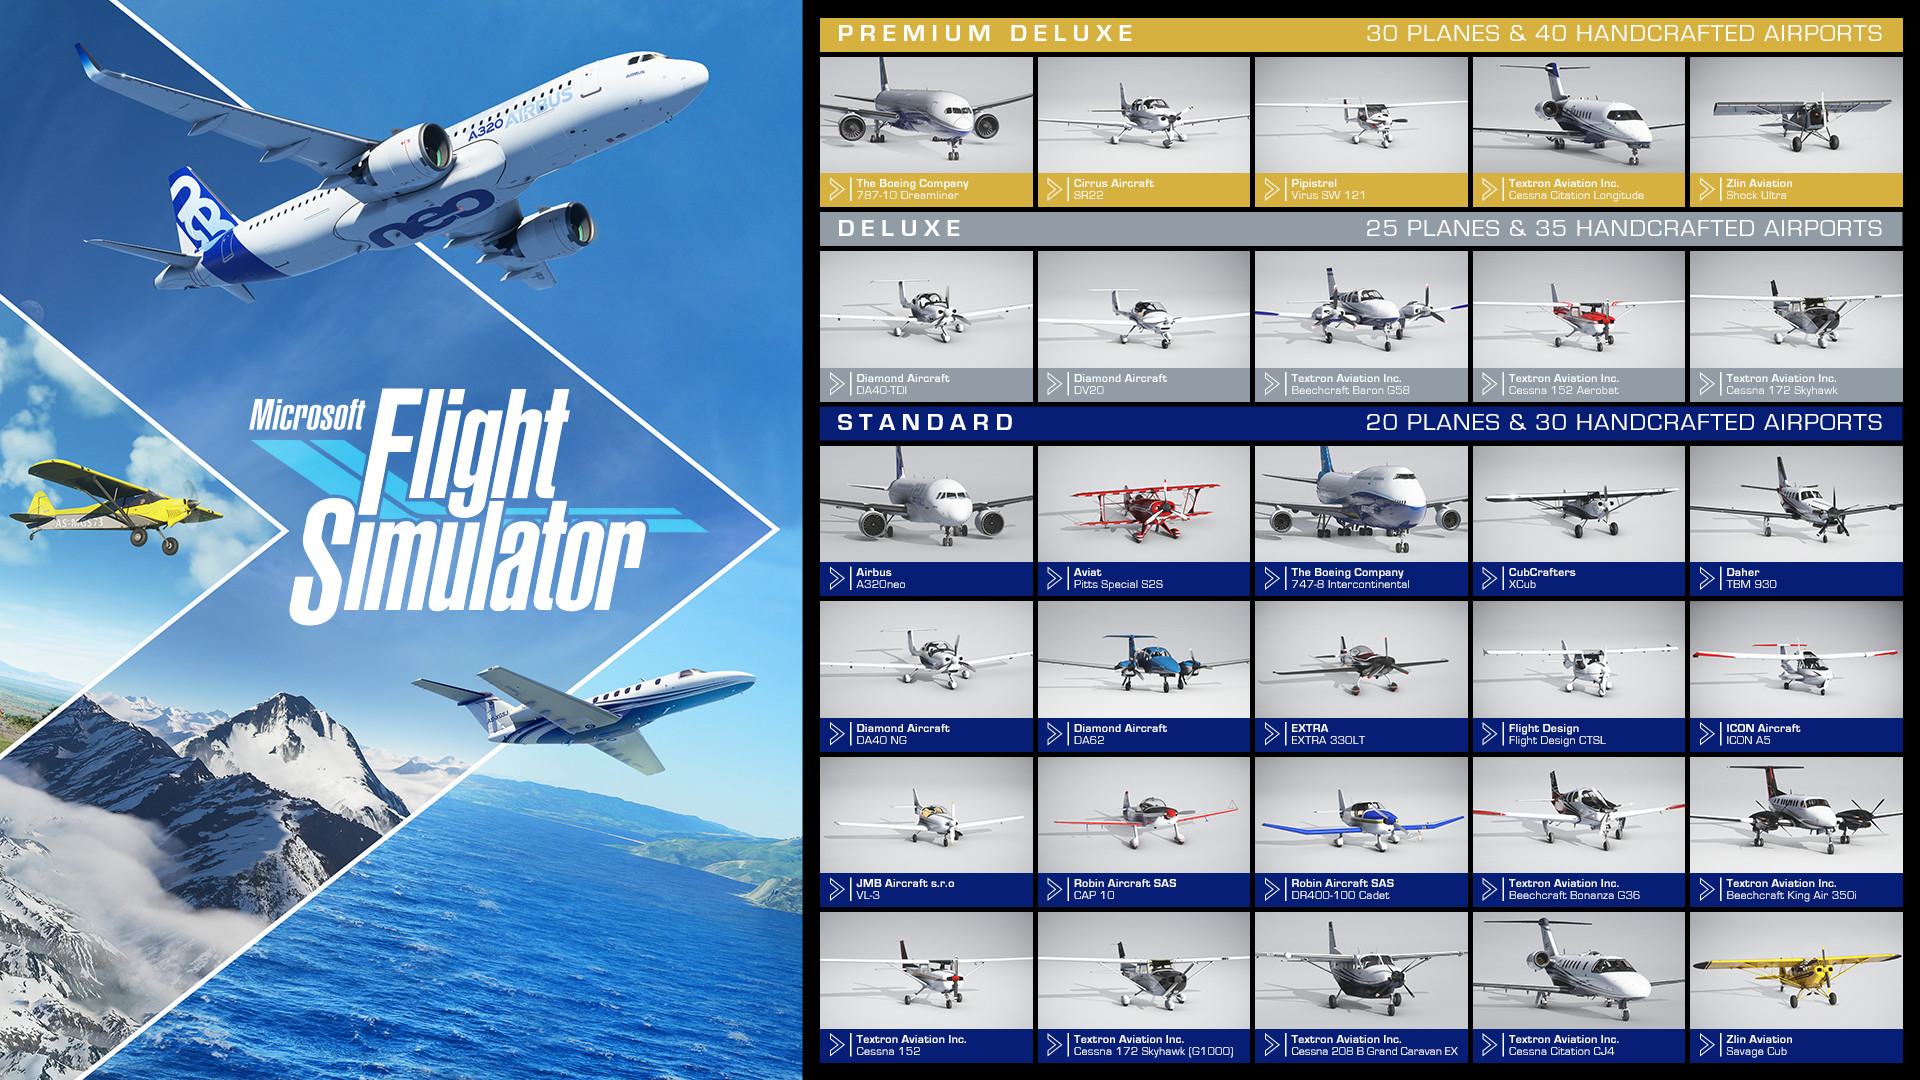 Microsoft Flight Simulator Deluxe Game Of The Year Edition US Xbox Series X,S / Windows 10 CD Key